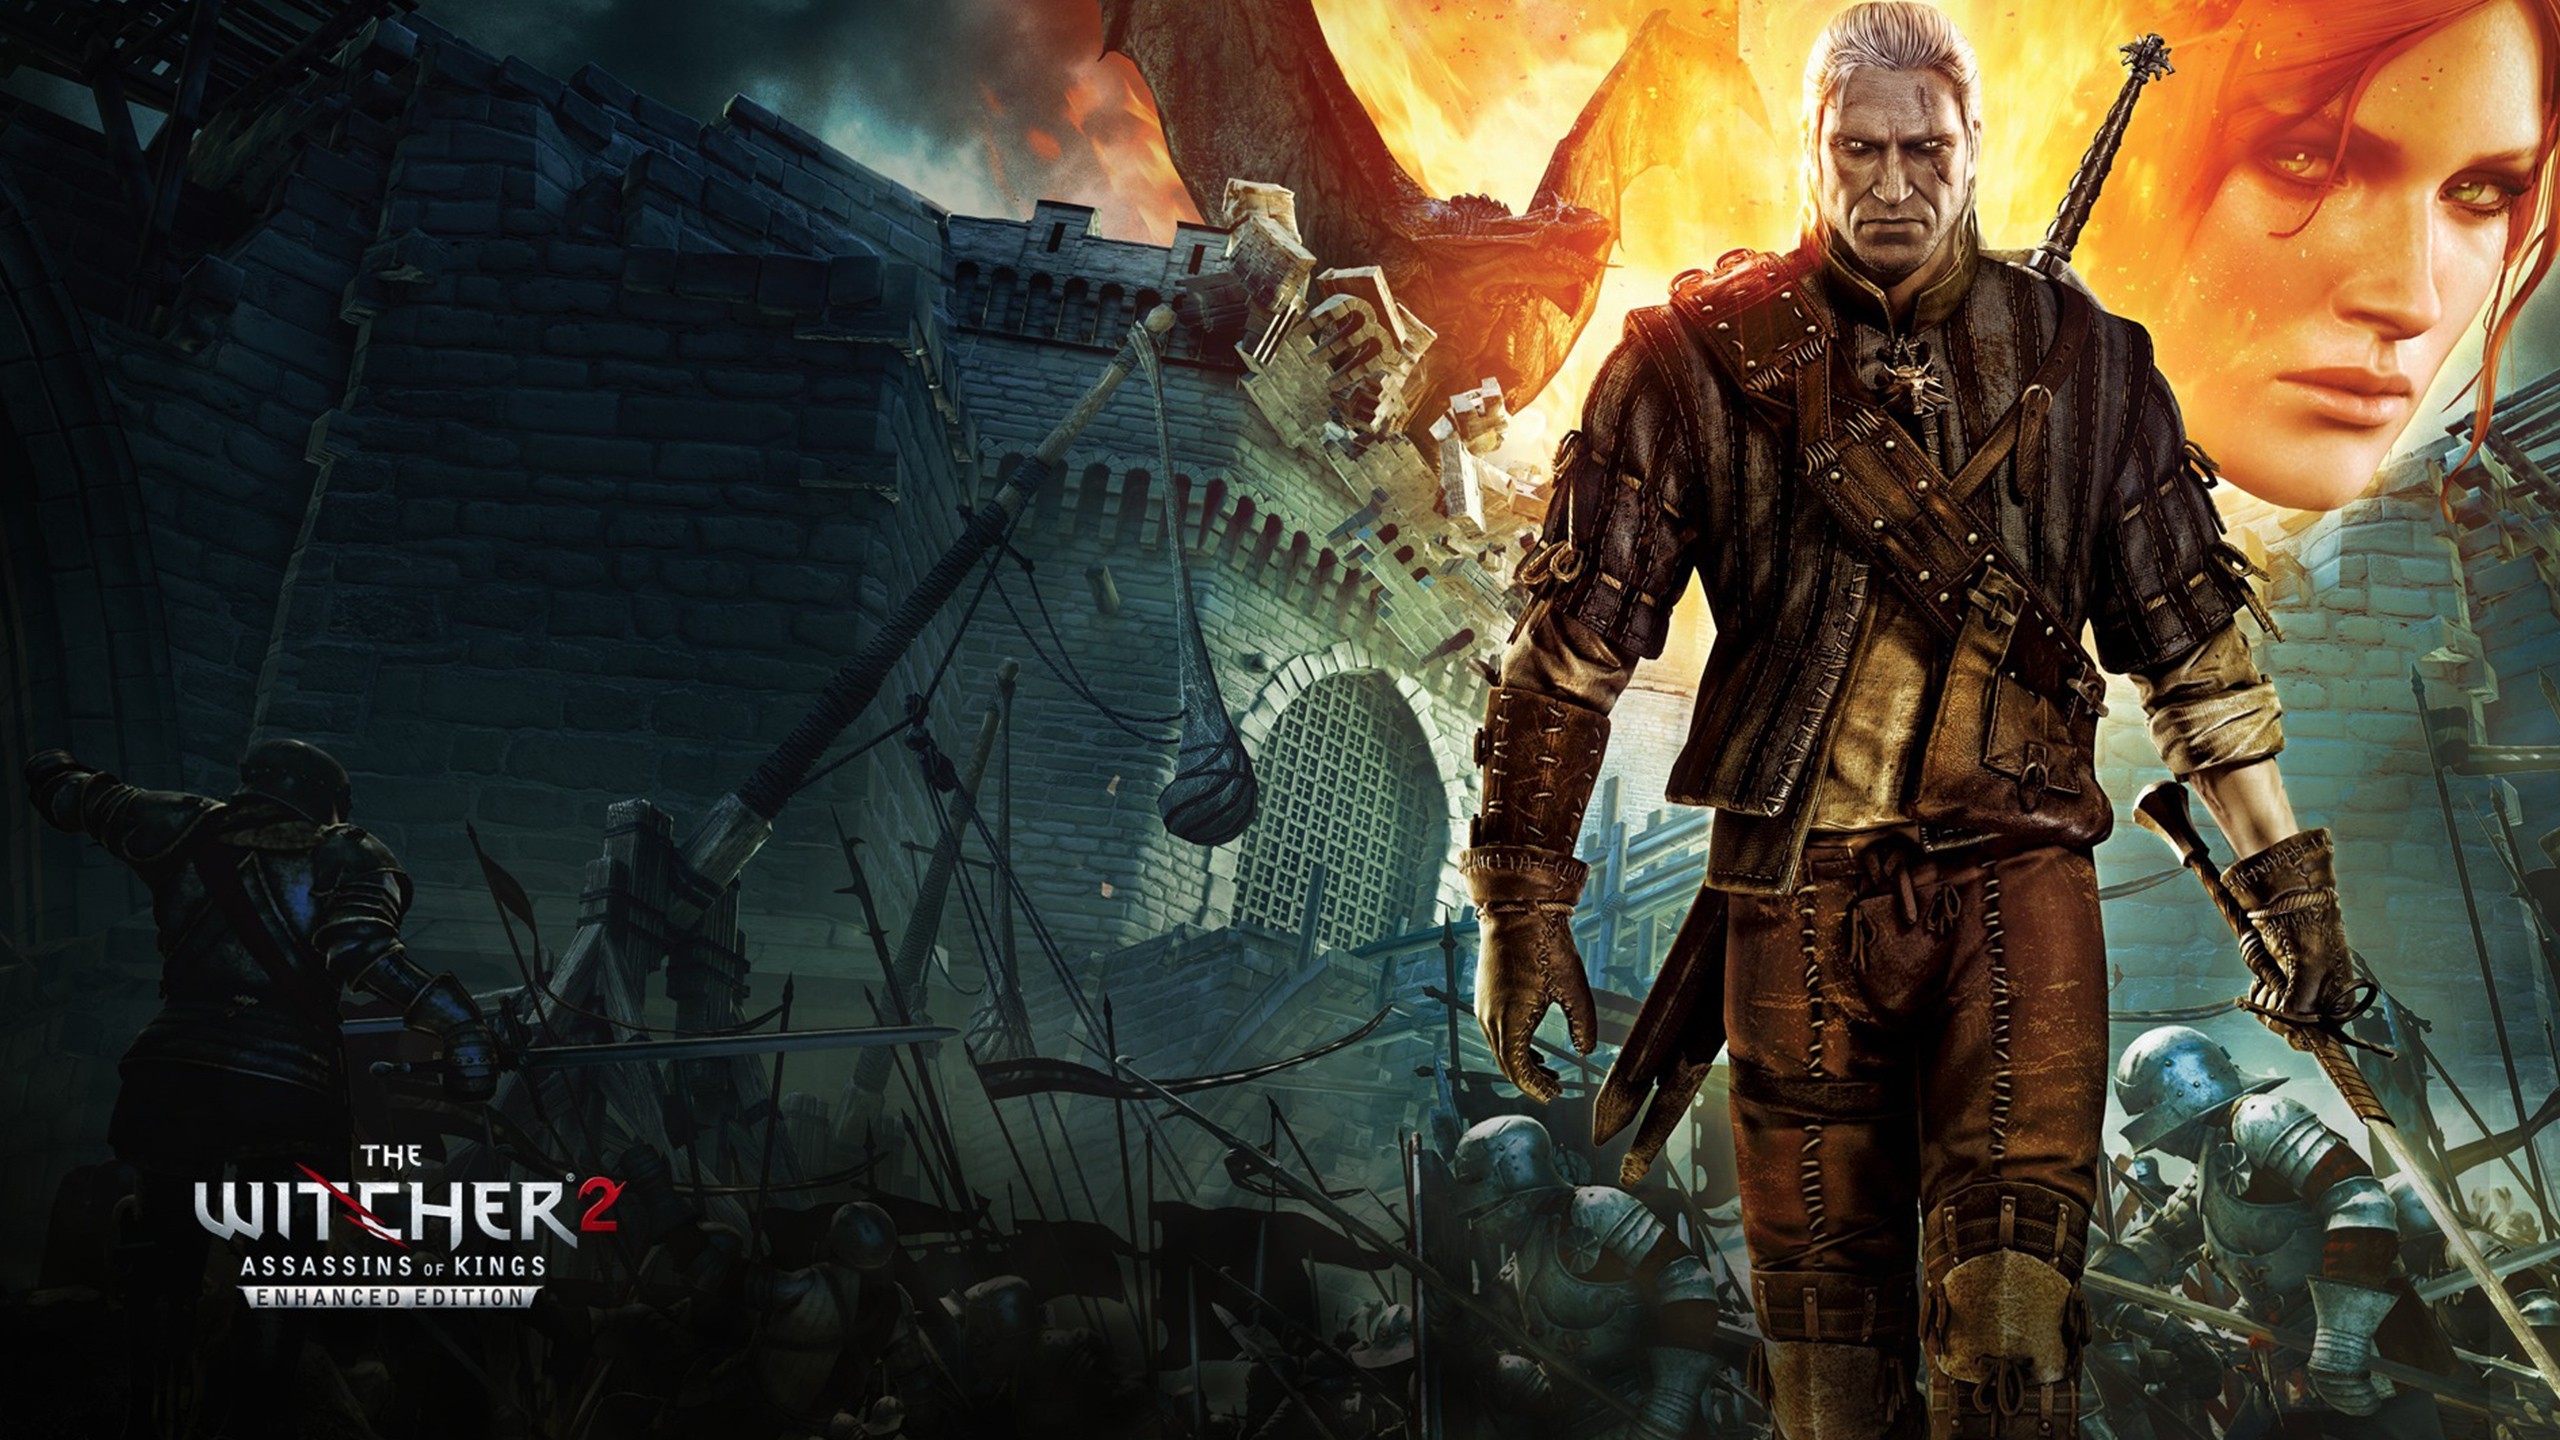 The Witcher Assassins Of Kings HD Wallpaper Pictures Image